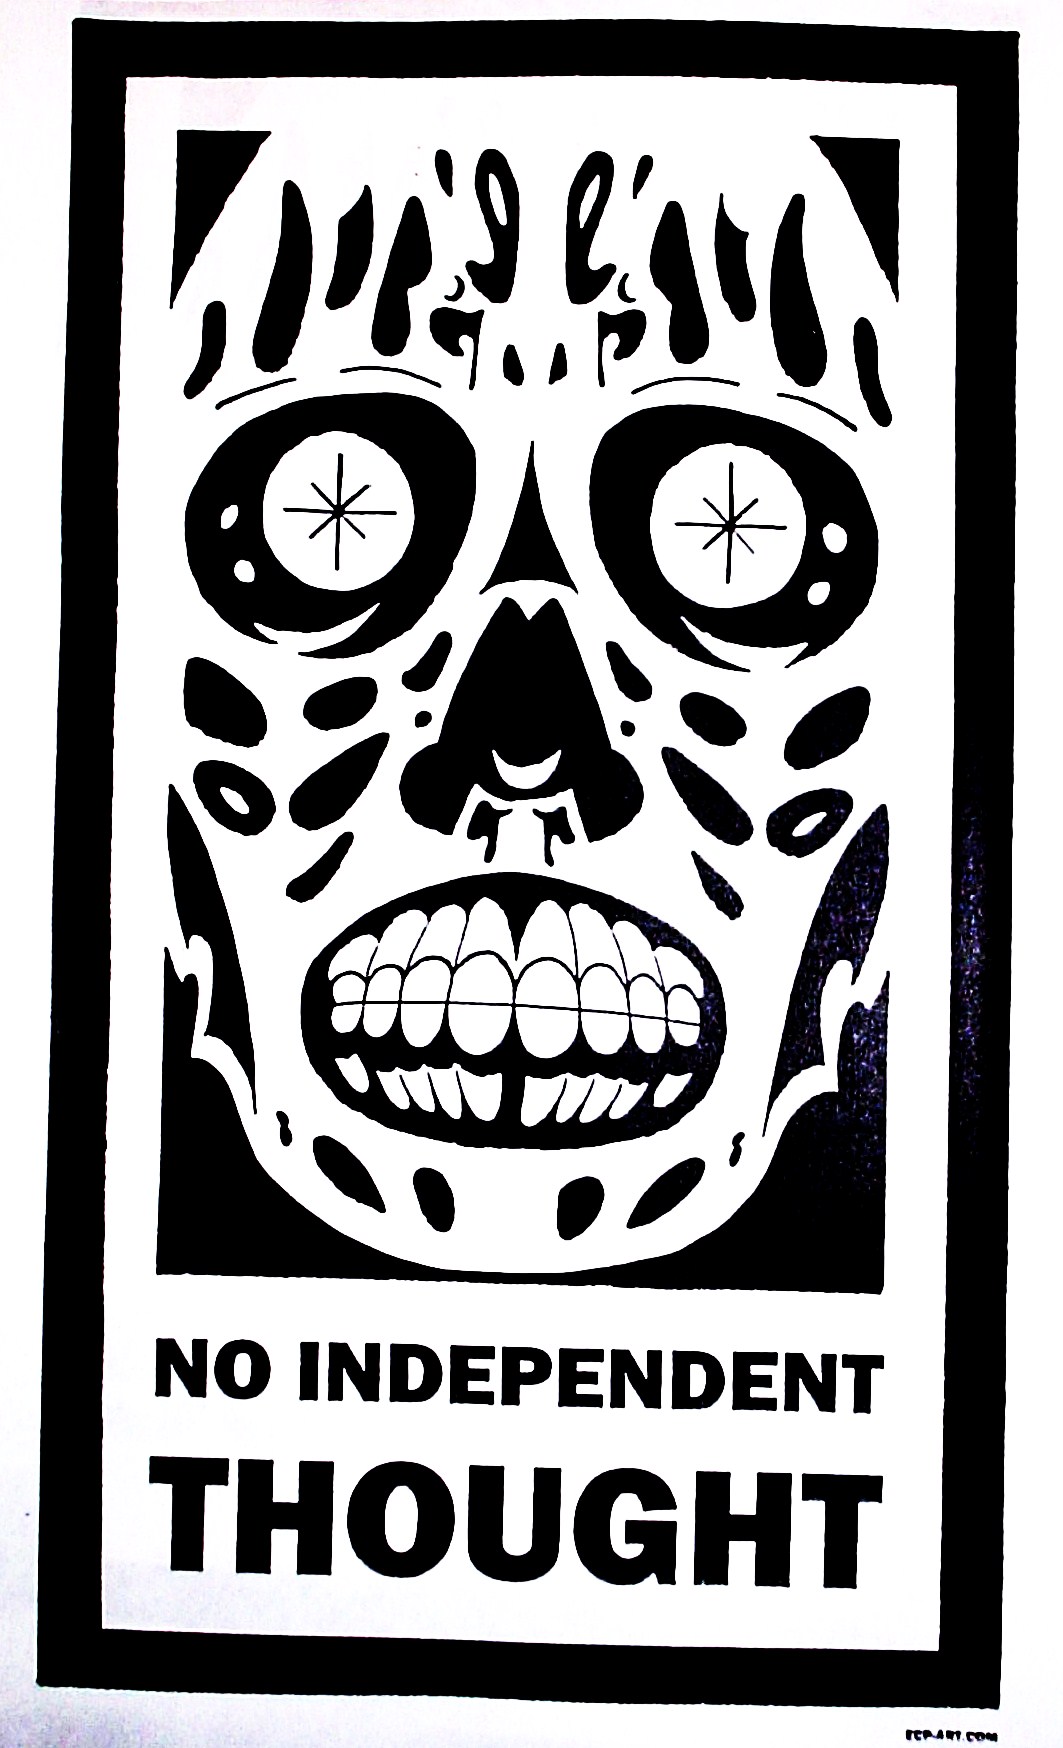 NO INDEPENDENT THOUGHT